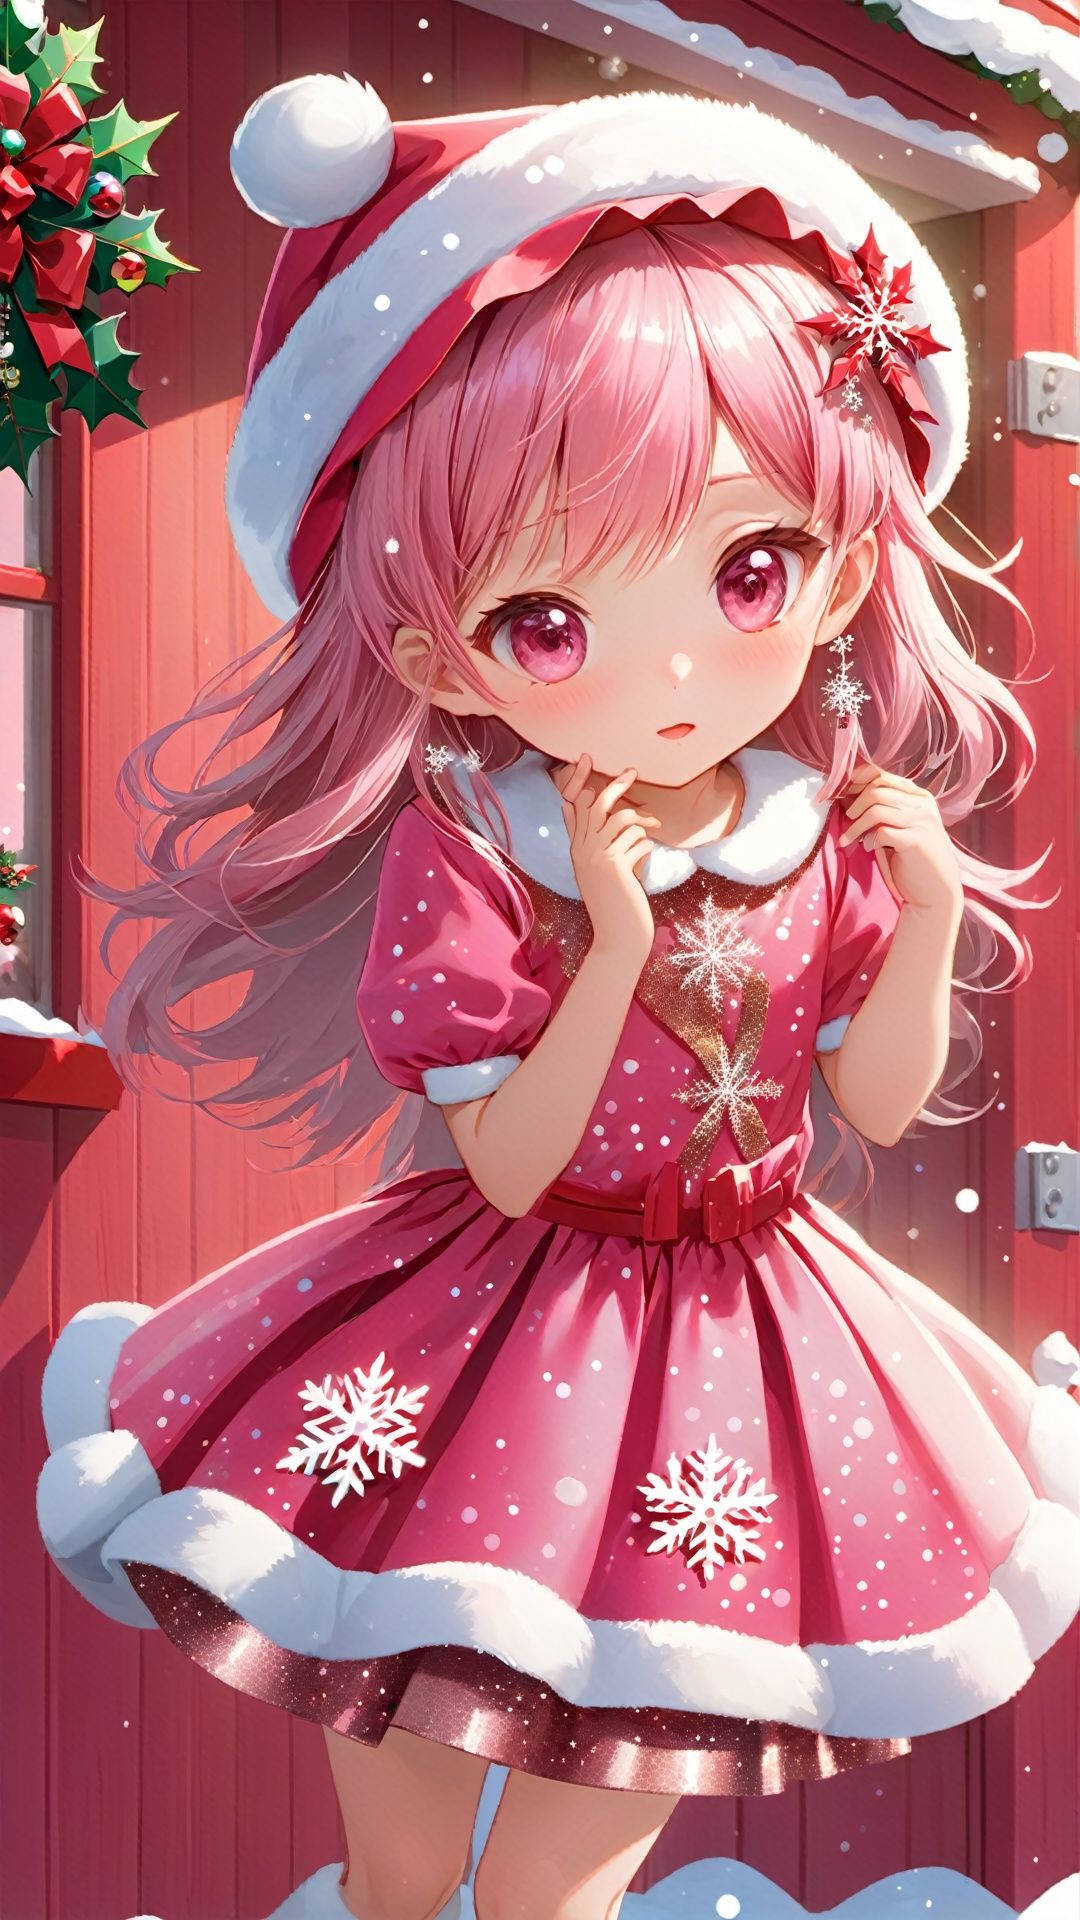 In front of a pink cabin, a cute Christmas girl is getting ready for a Christmas party. She wore a pink dress with a snowflake pattern, and the skirt was dotted with silver sequins, shining with warm light. She wears an exquisite rose-red Christmas hat on her head. The brim of the hat is inlaid with small bells. When she shakes it gently, it makes a melodious jingle sound.